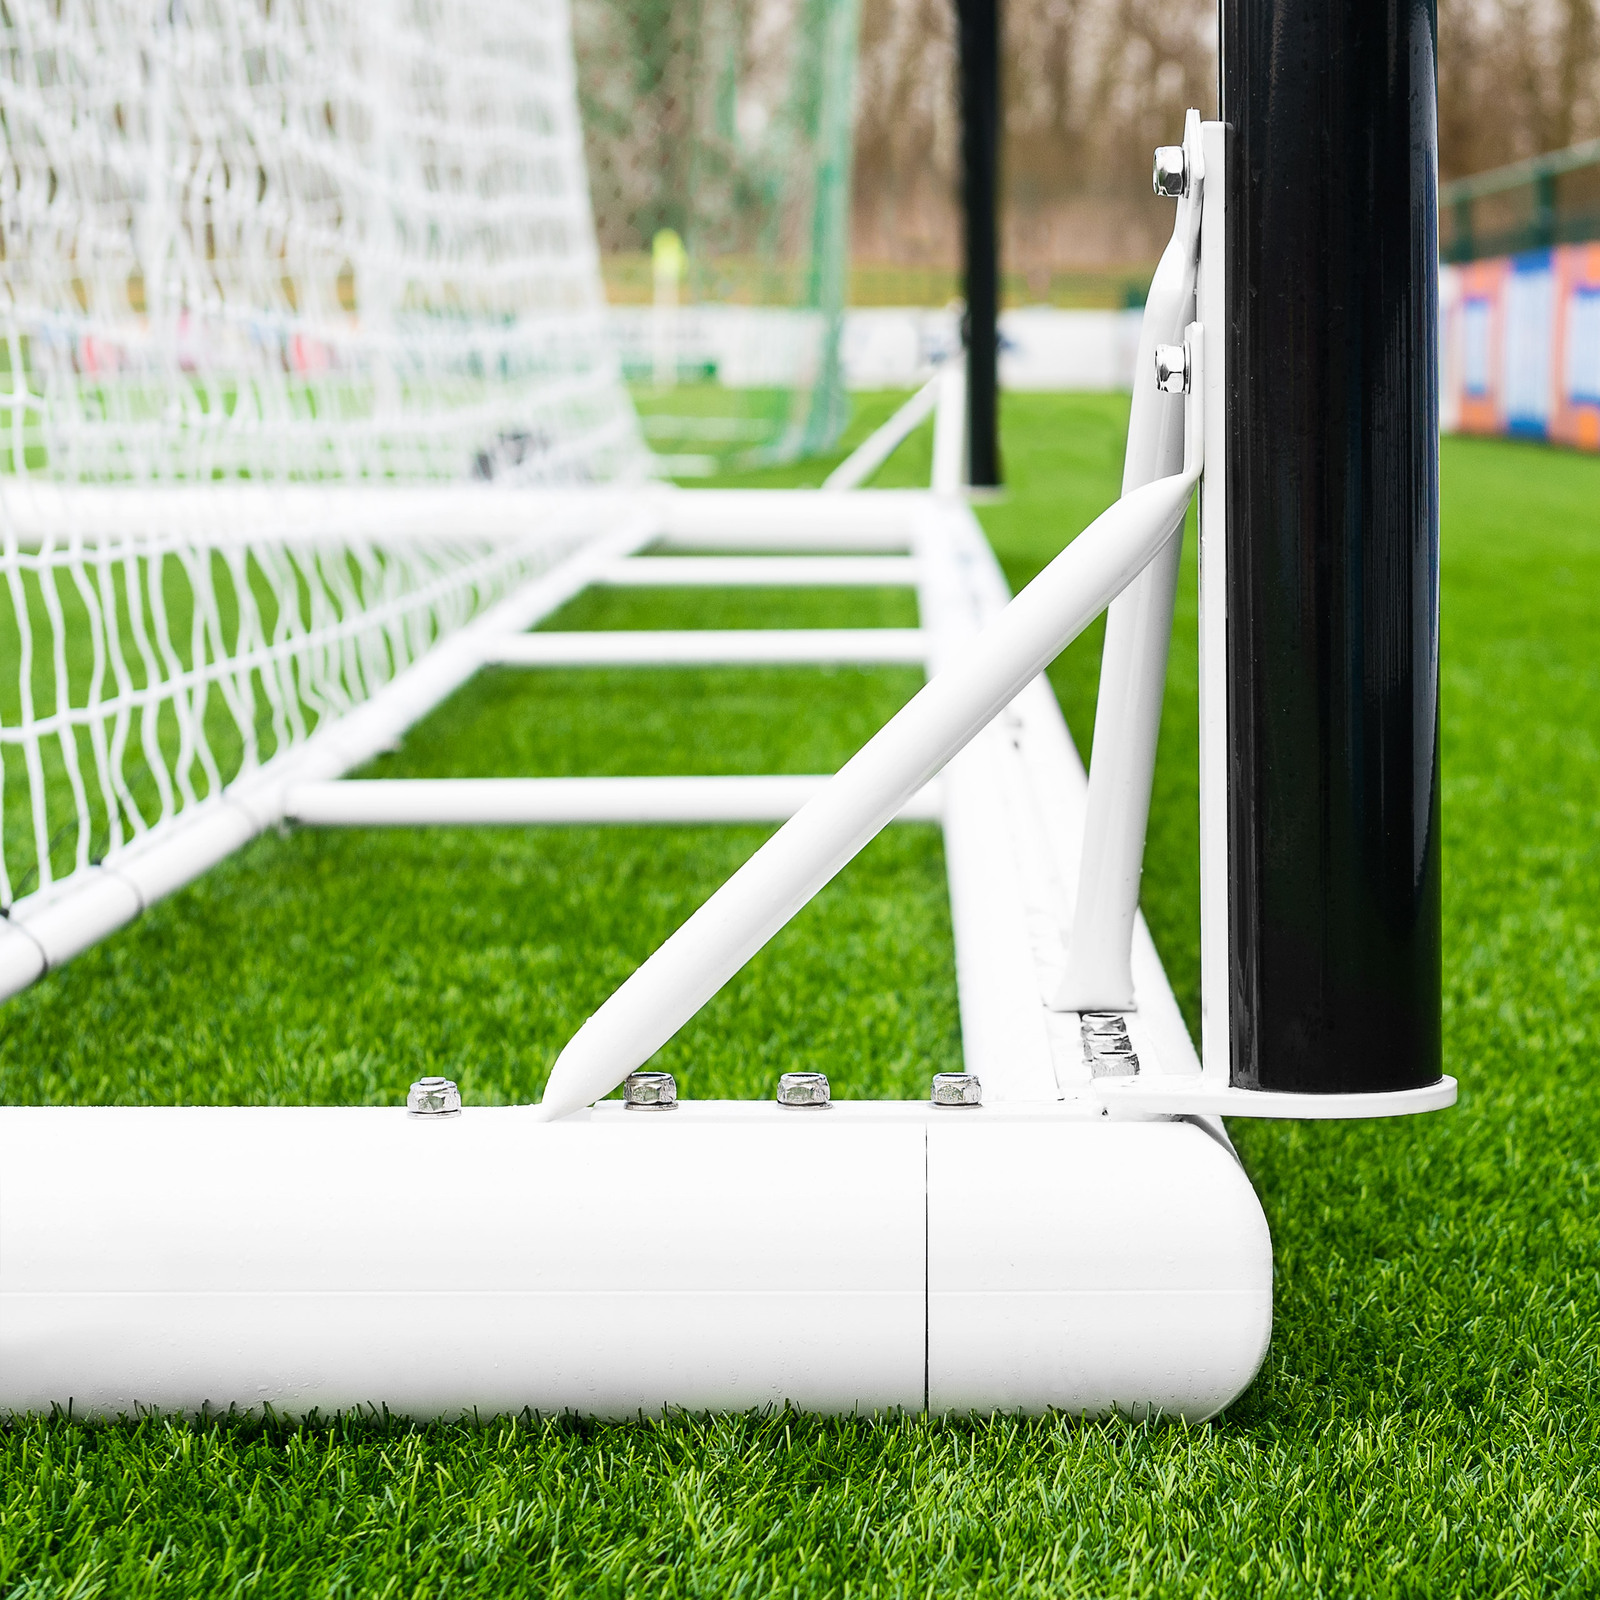 3.7M X 1.8M FORZA ALU110 FREESTANDING STADIUM BOX SOCCER GOAL [Single or Pair:: Single] [Wheel Options:: 360° Wheels] [Goal Weights:: With Weights]